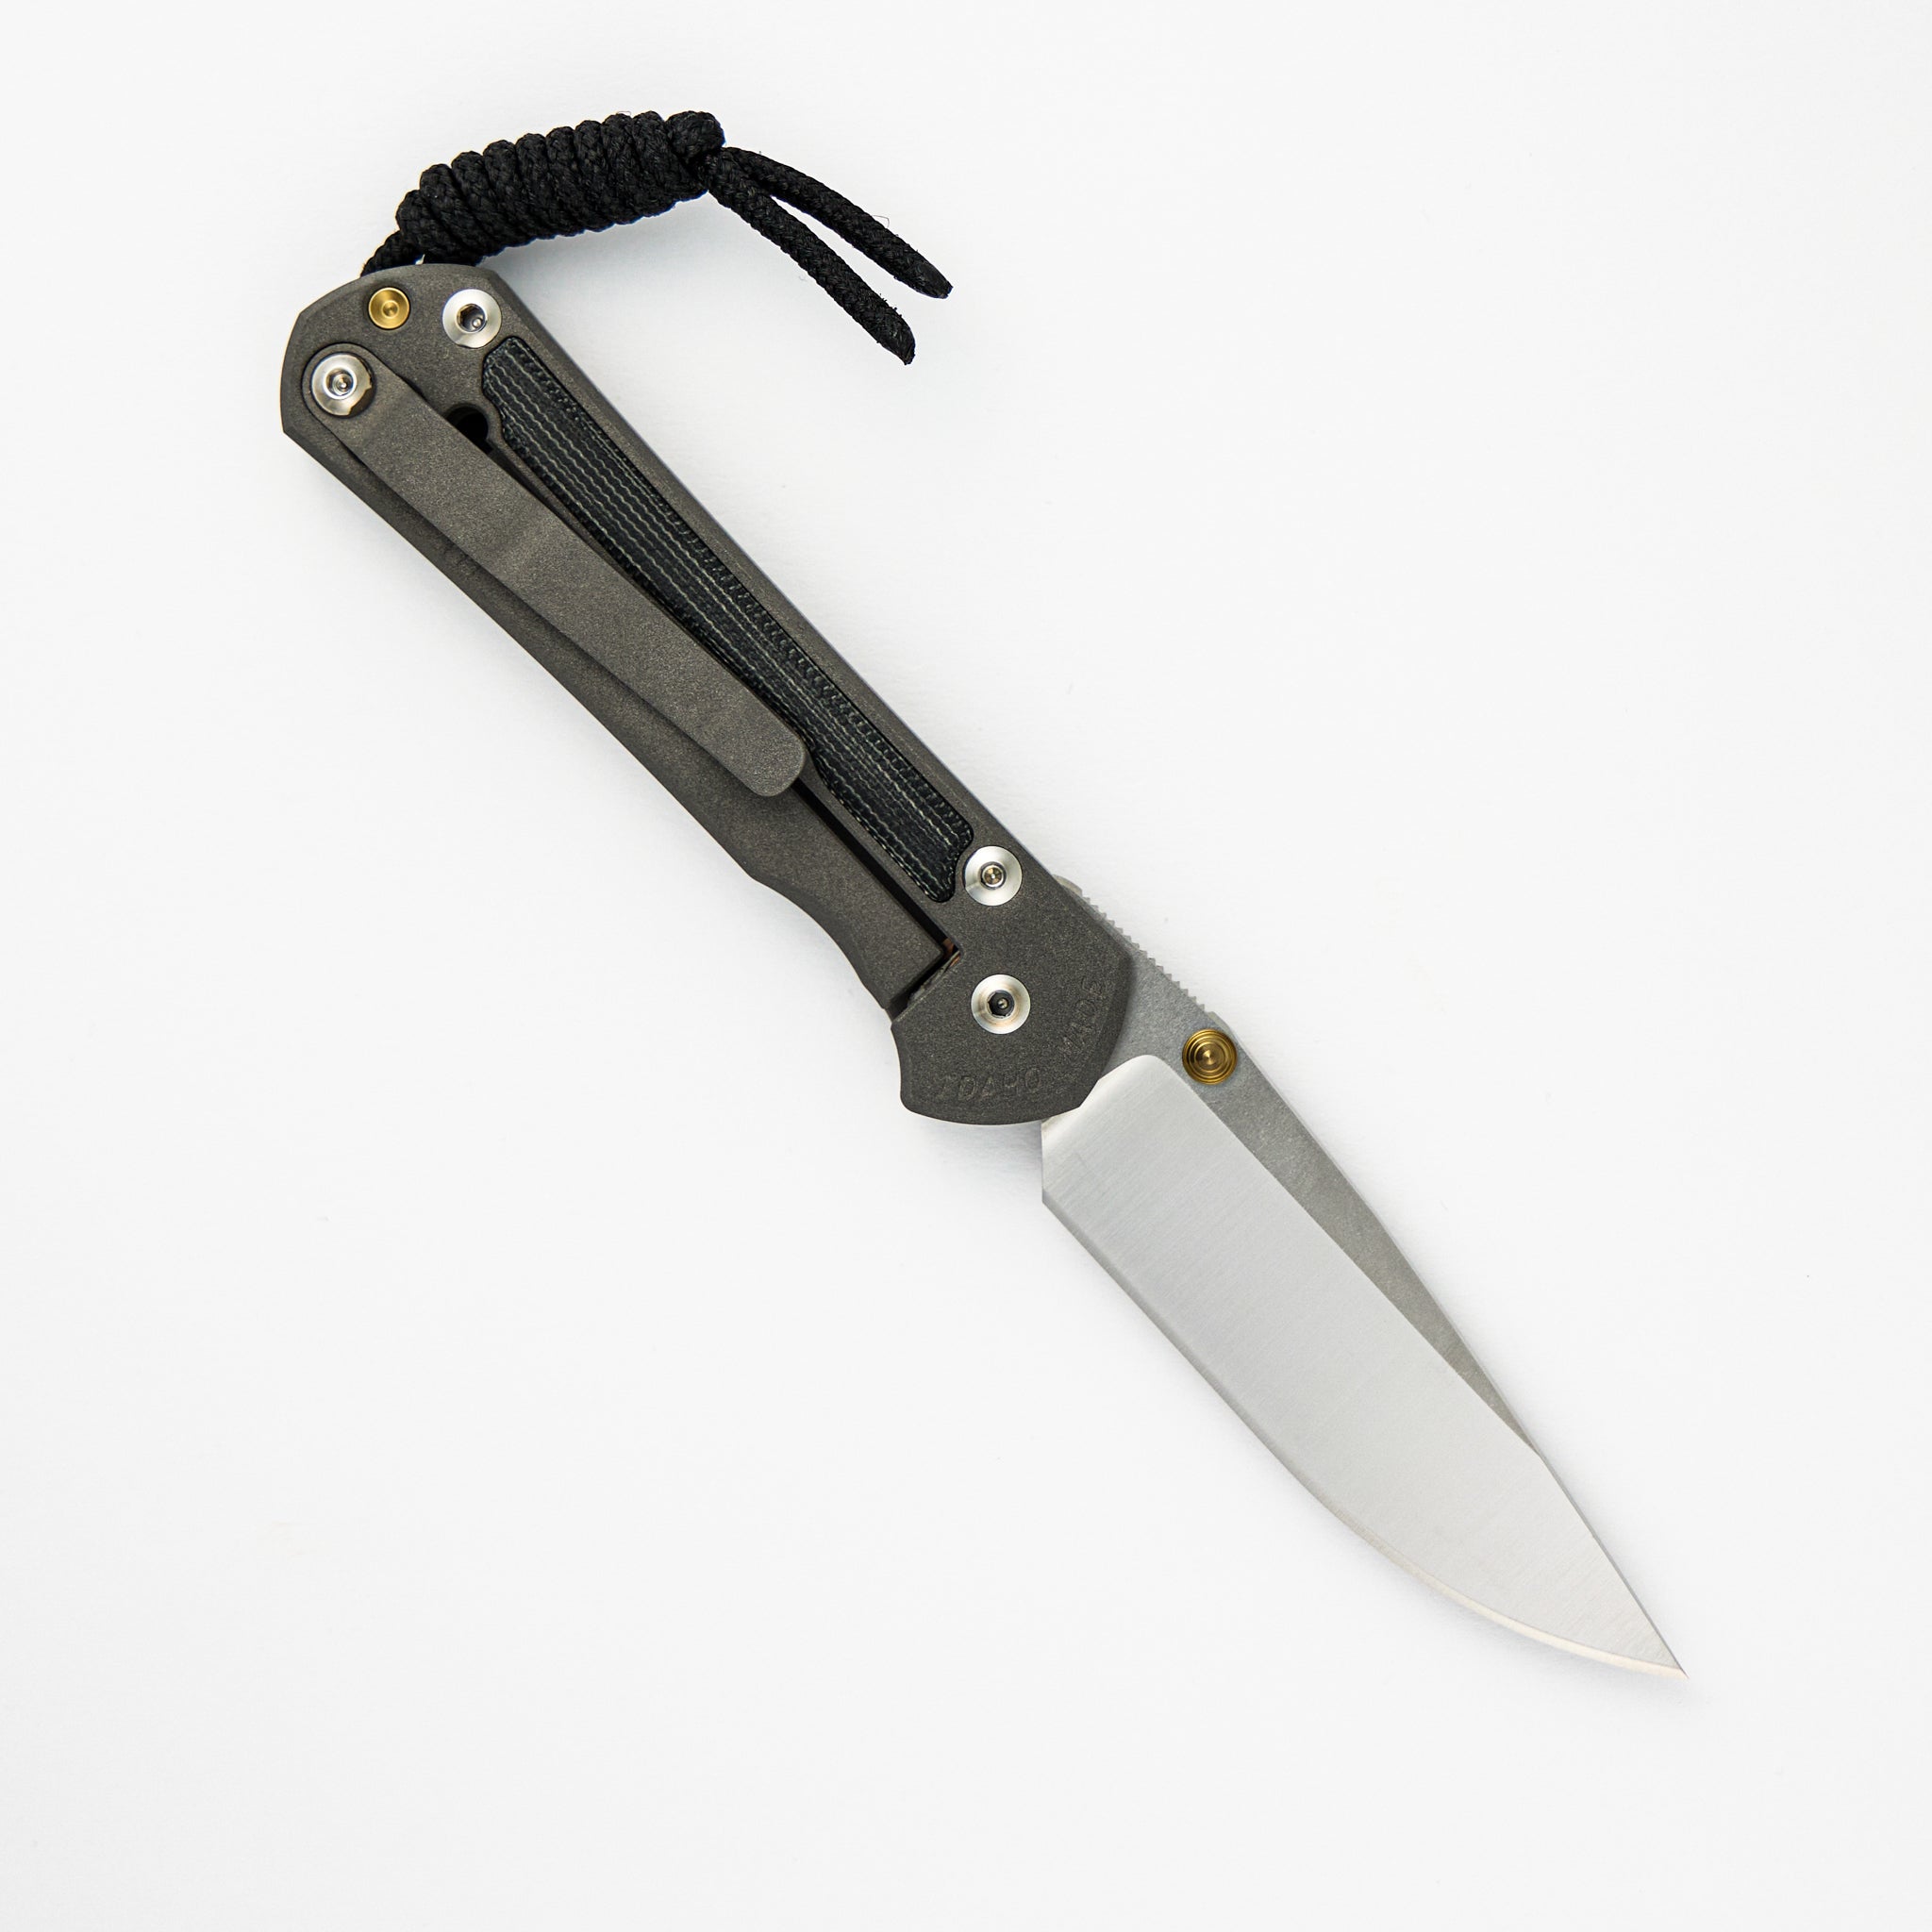 CHRIS REEVE SMALL SEBENZA 31 BLACK CANVAS MICARTA INLAY – POLISHED CPM MAGNACUT BLADE – GOLD DOUBLE THUMB LUGS